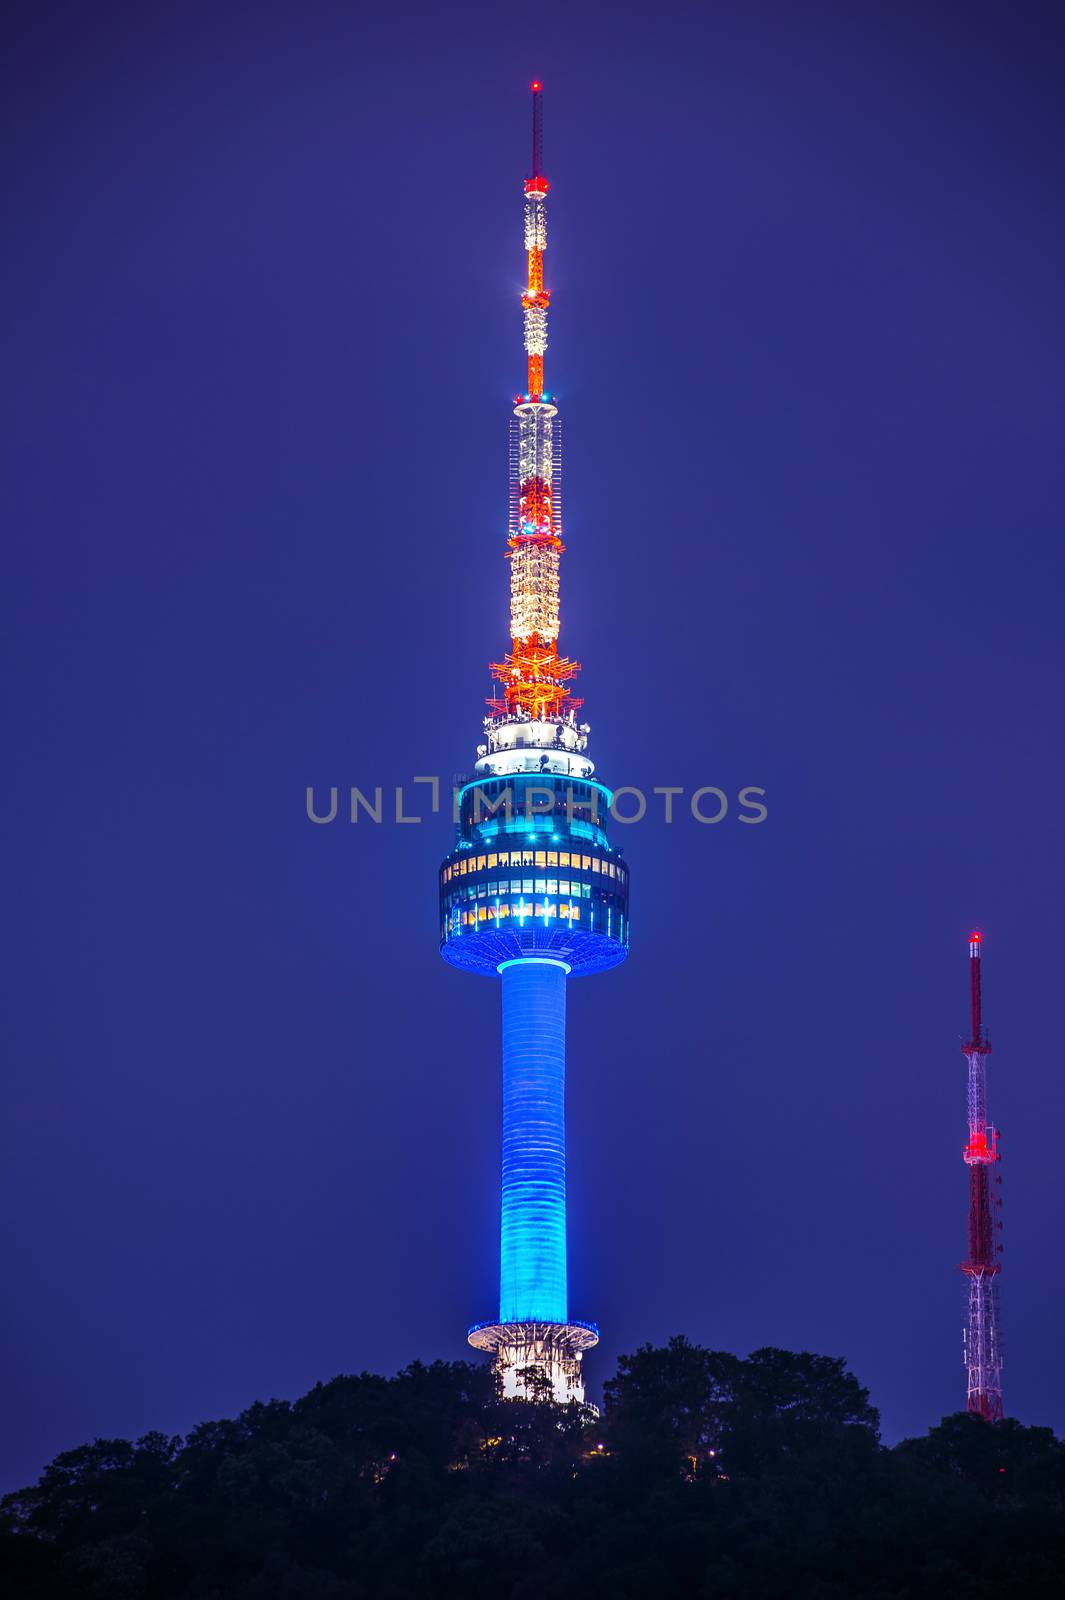 Seoul tower at night in Seoul, South Korea. by gutarphotoghaphy